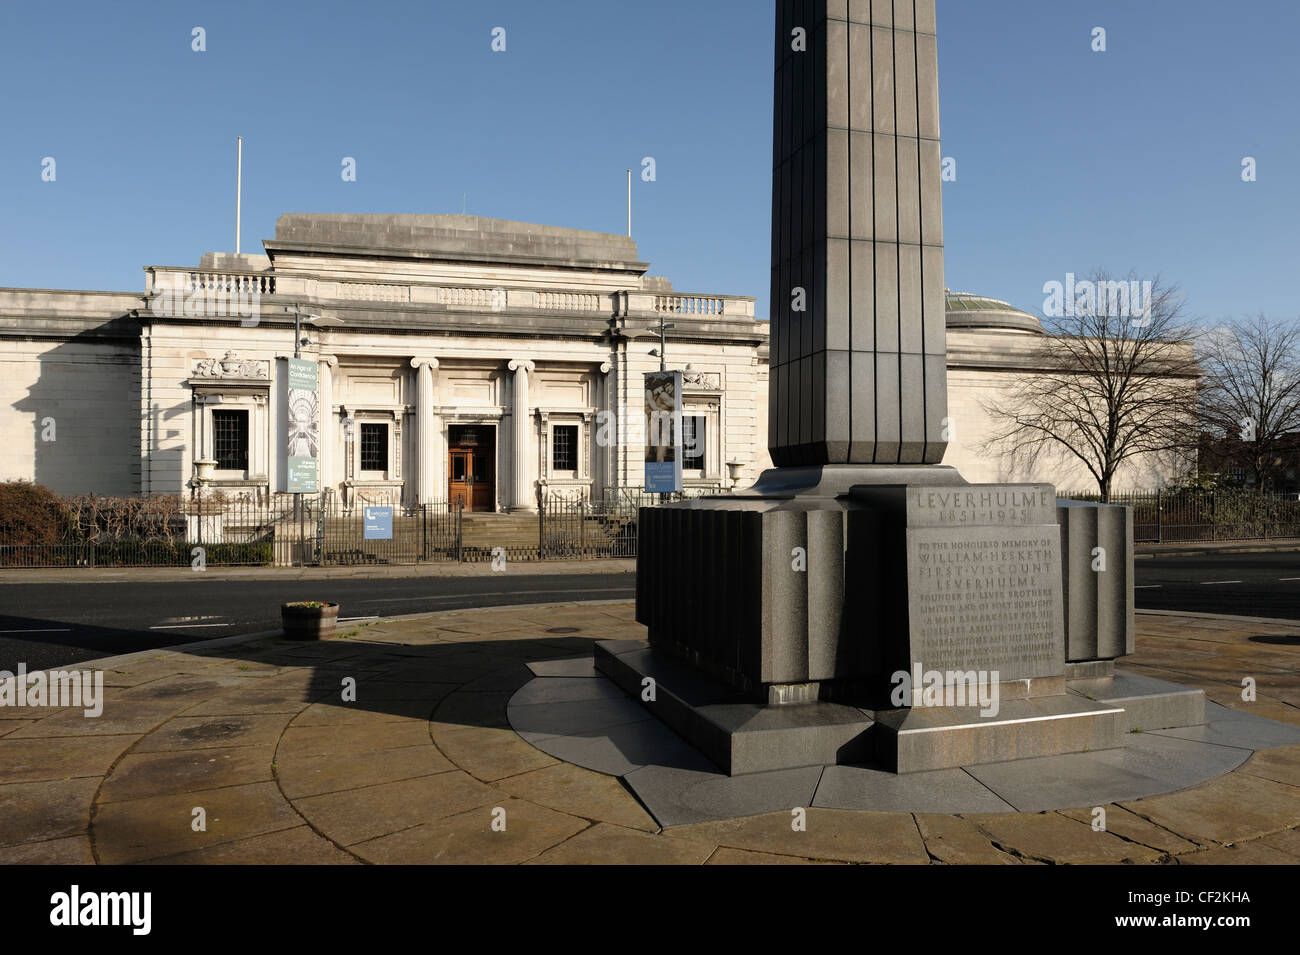 Lord Leverhulme Memorial outside the Lady Lever Art Gallery Port Sunlight Village Stock Photo